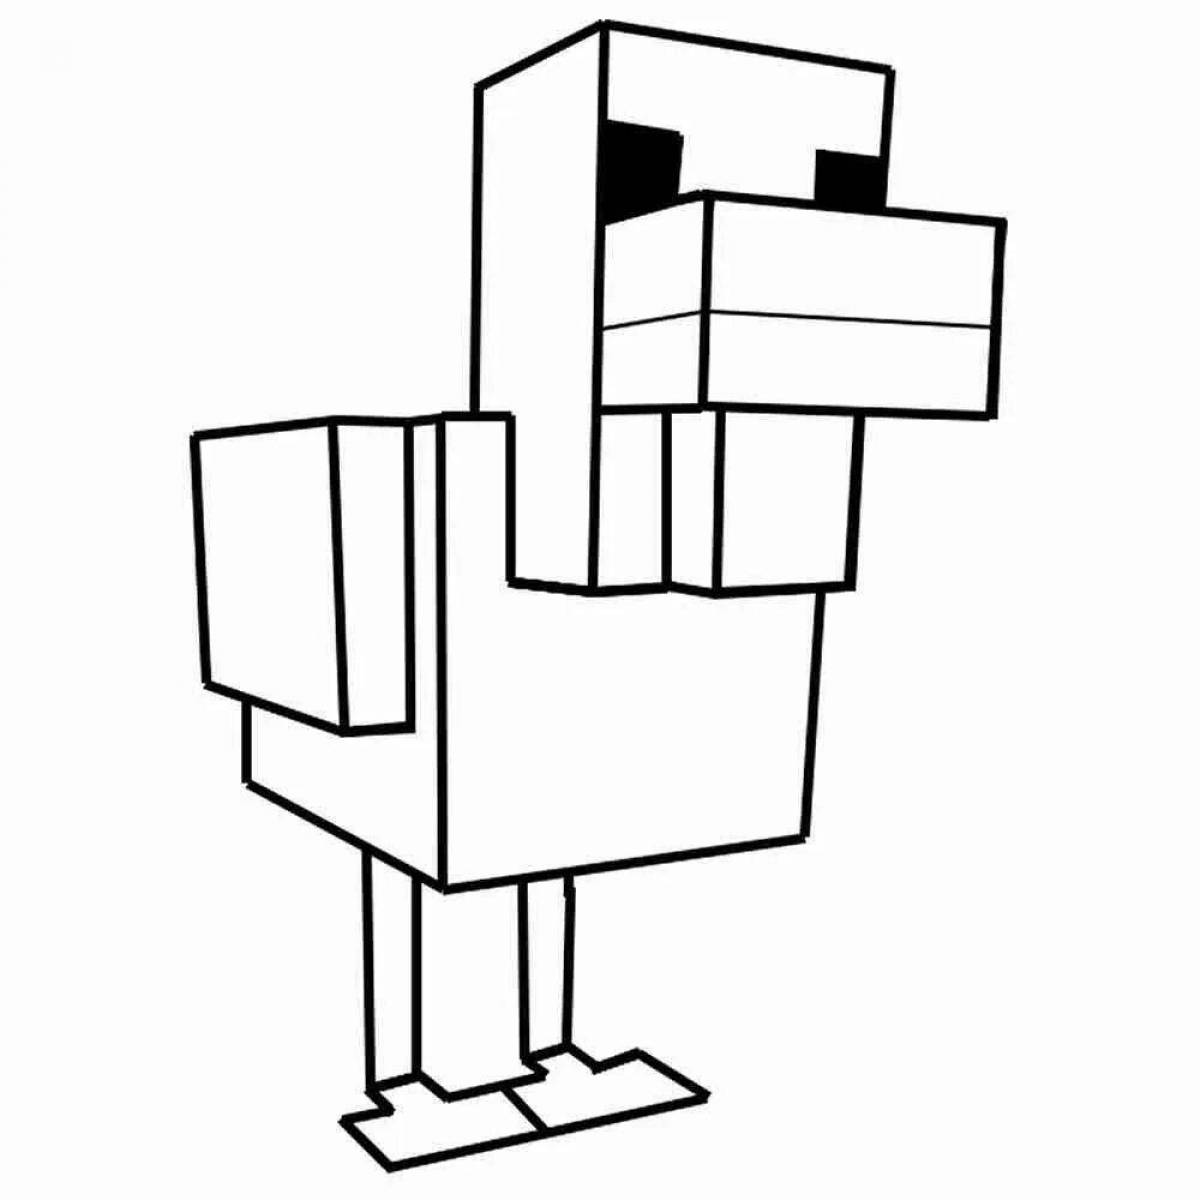 Fancy minecraft pig coloring pages